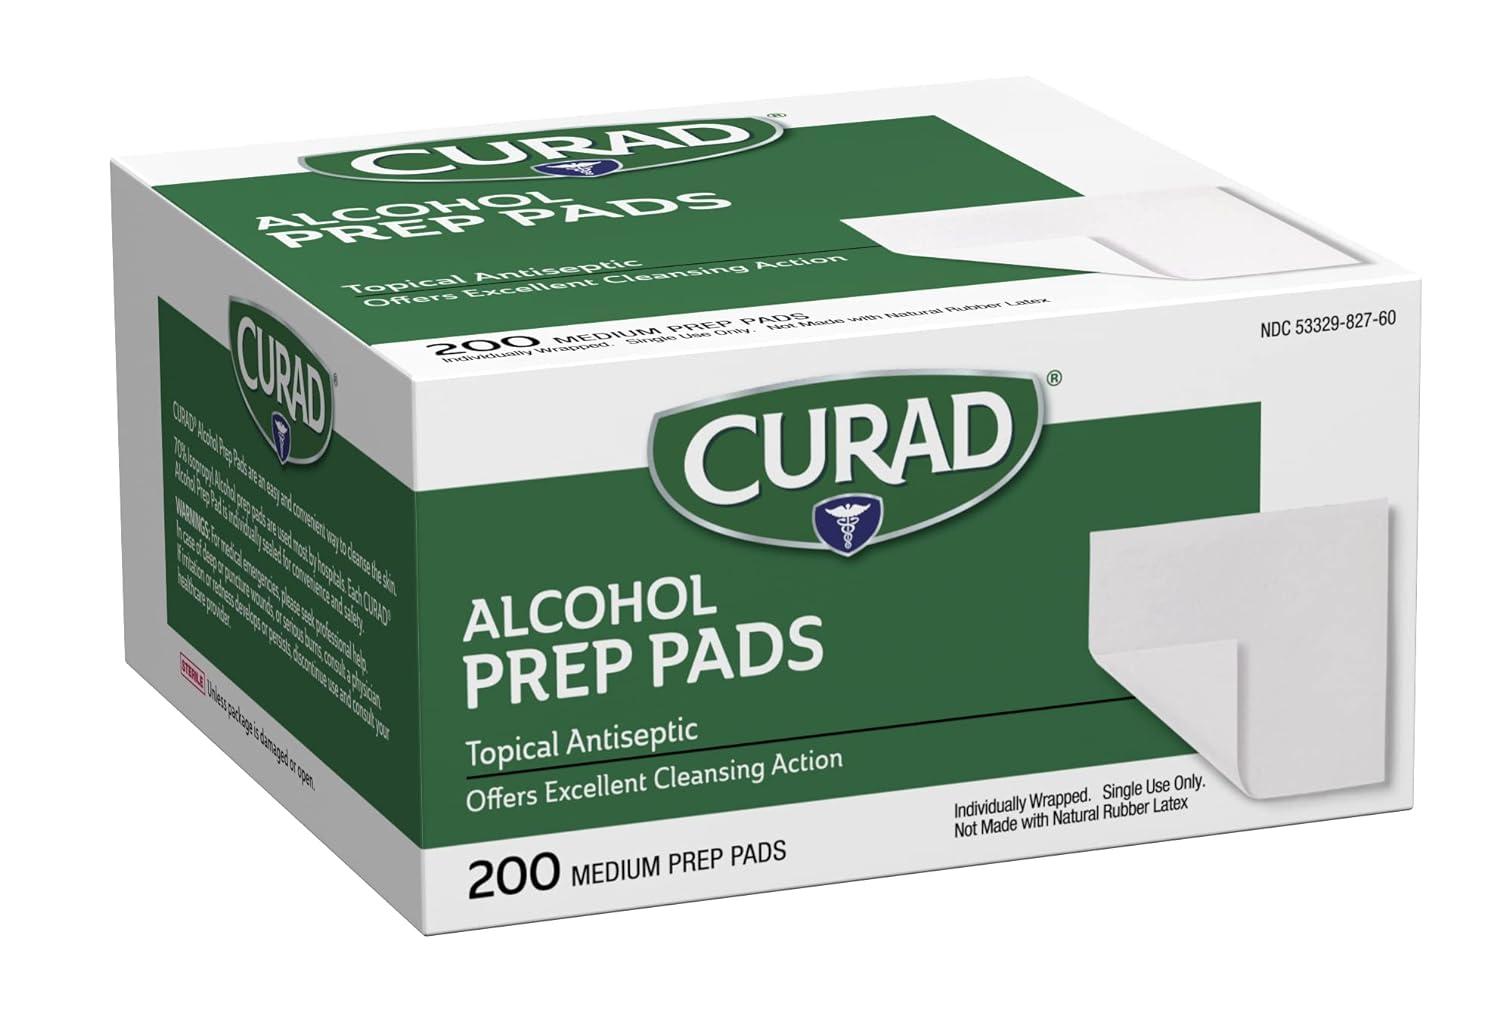 Curad Alcohol Disinfectant Prep Pads 200 Pack for $3.98